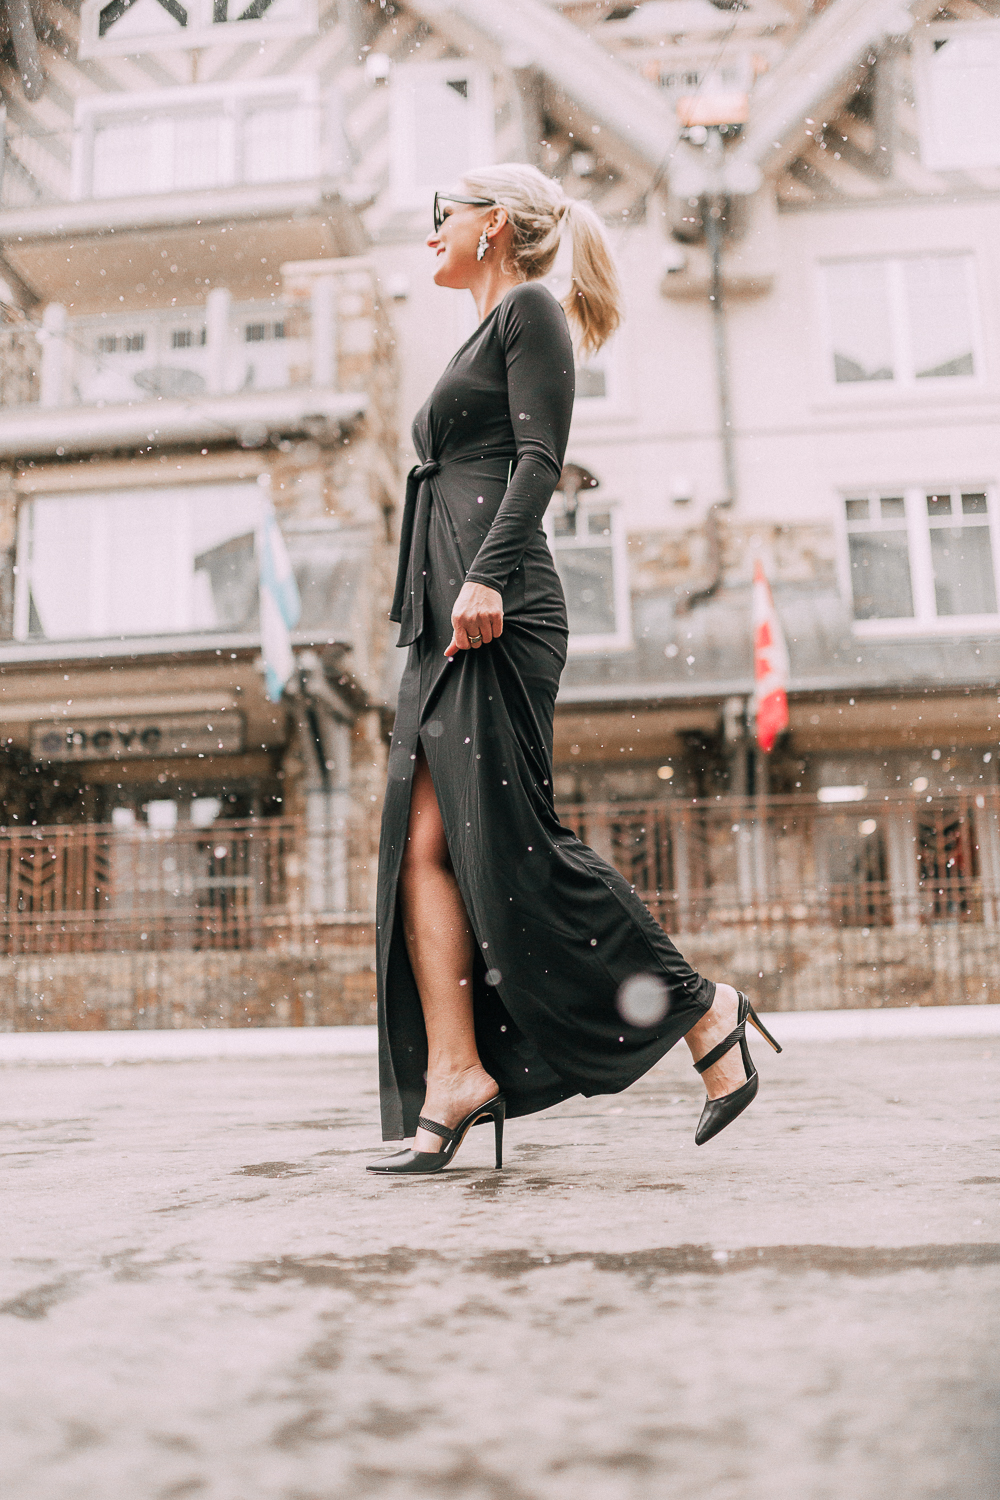 Unexpected holiday party outfits featuring a long black maxi dress with high slit to show off legs and a knot under the bust on blonde fashion blogger in telluride, colorado in the snow